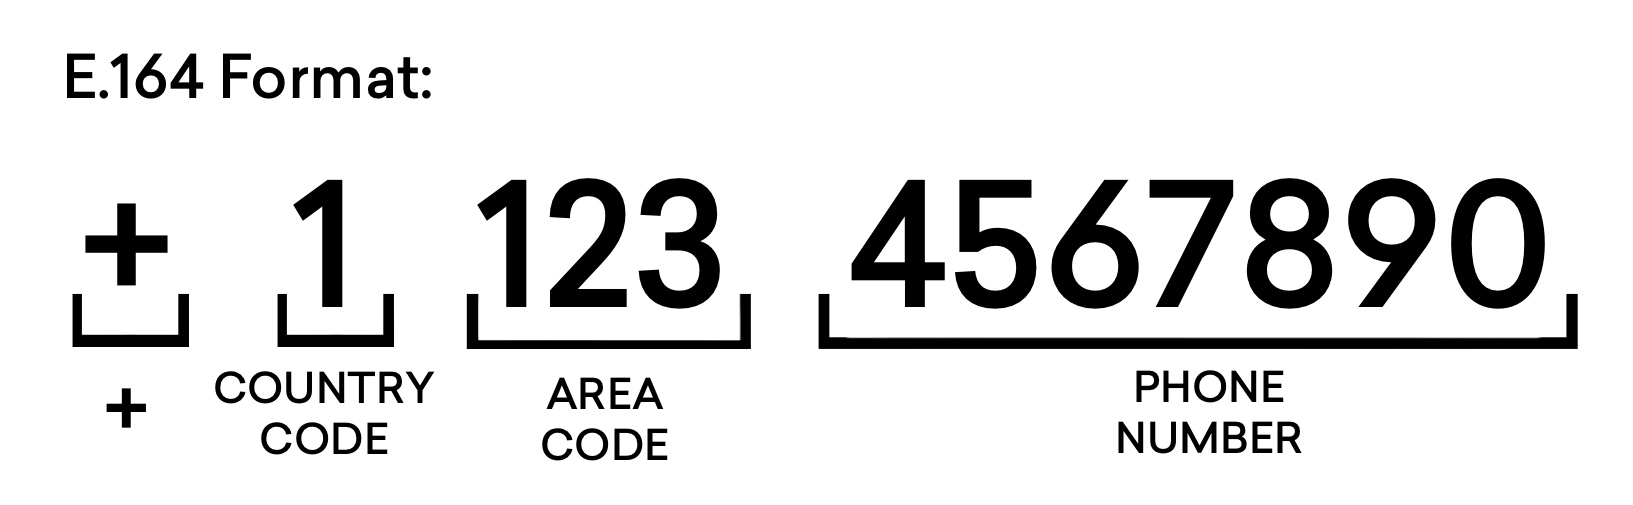 E.164 format consists of a plus sign, country code, area code, and phone number